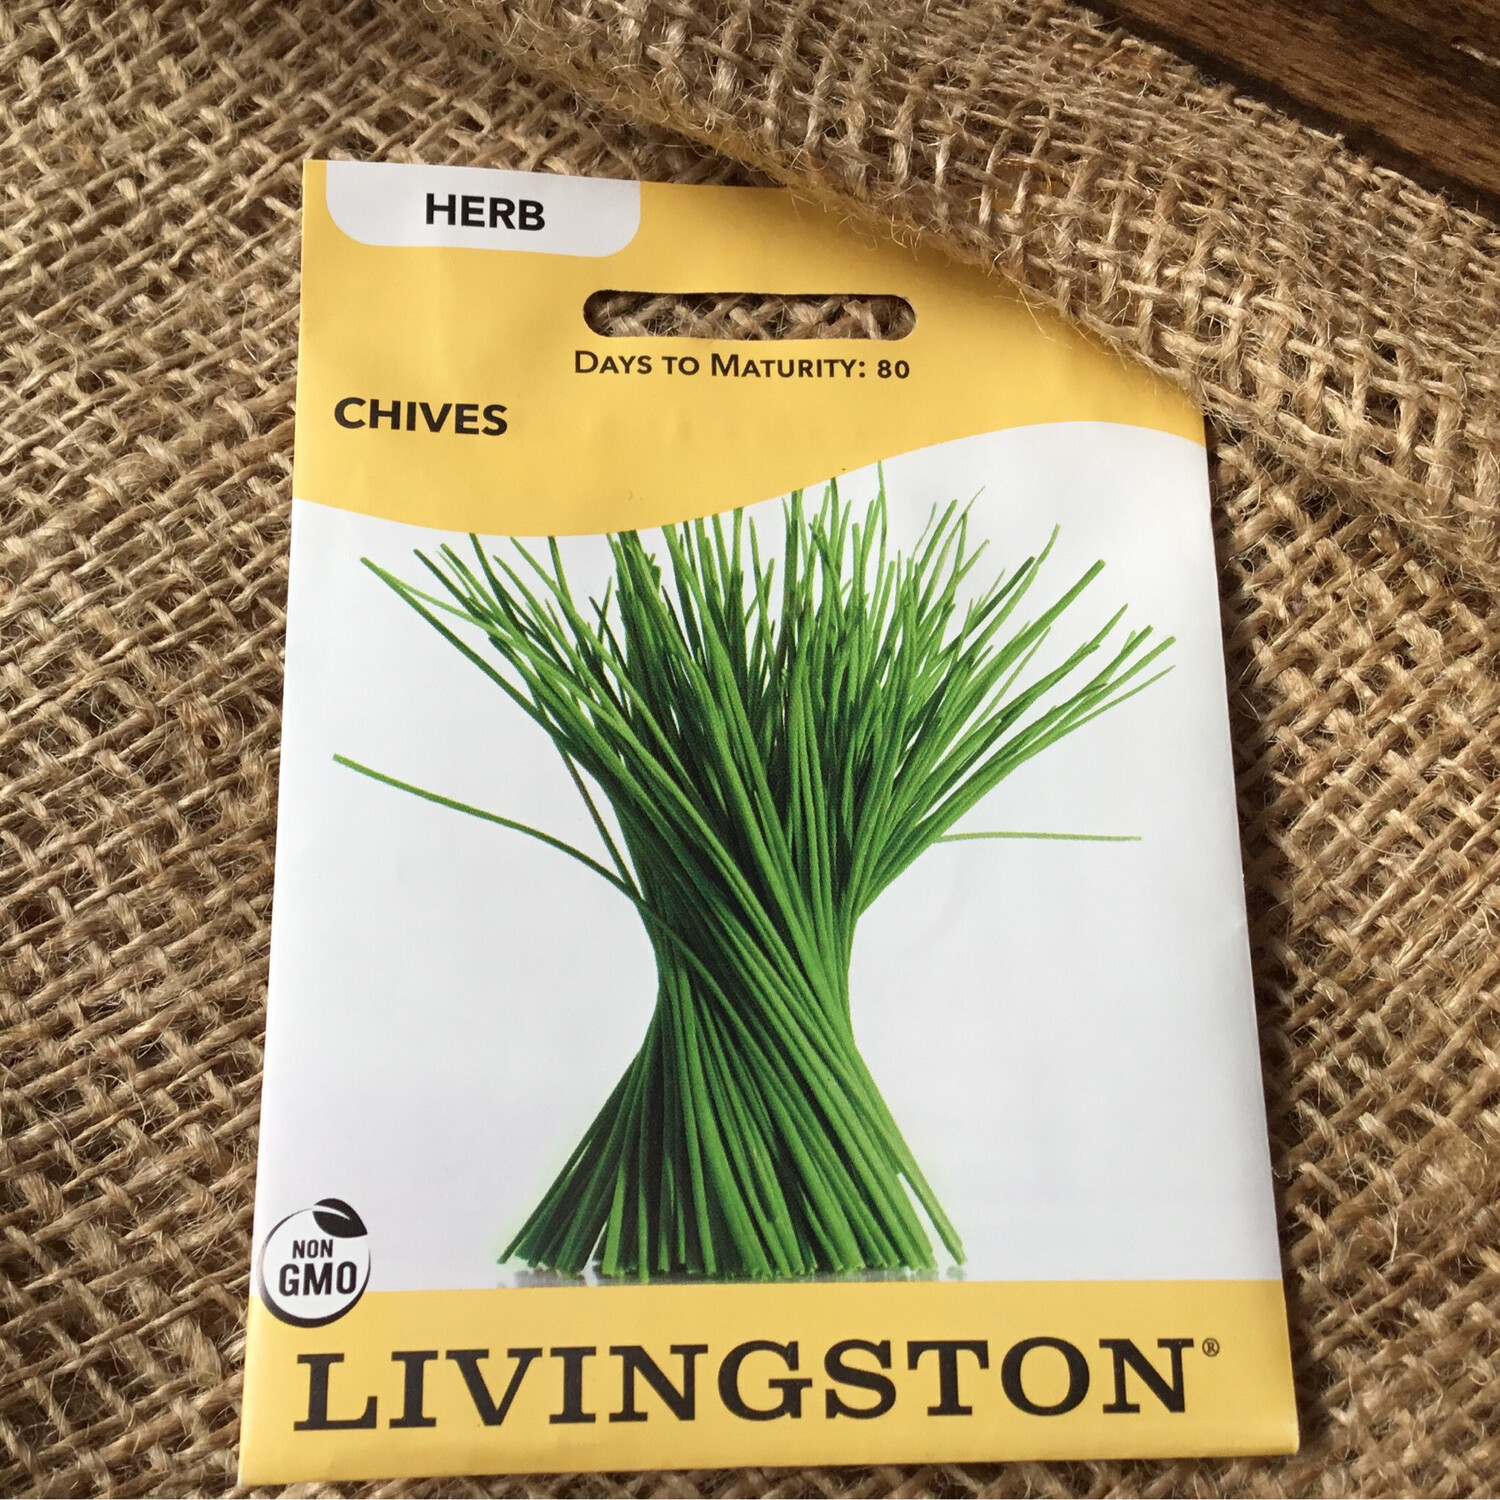 (Seed) Chives $2.99